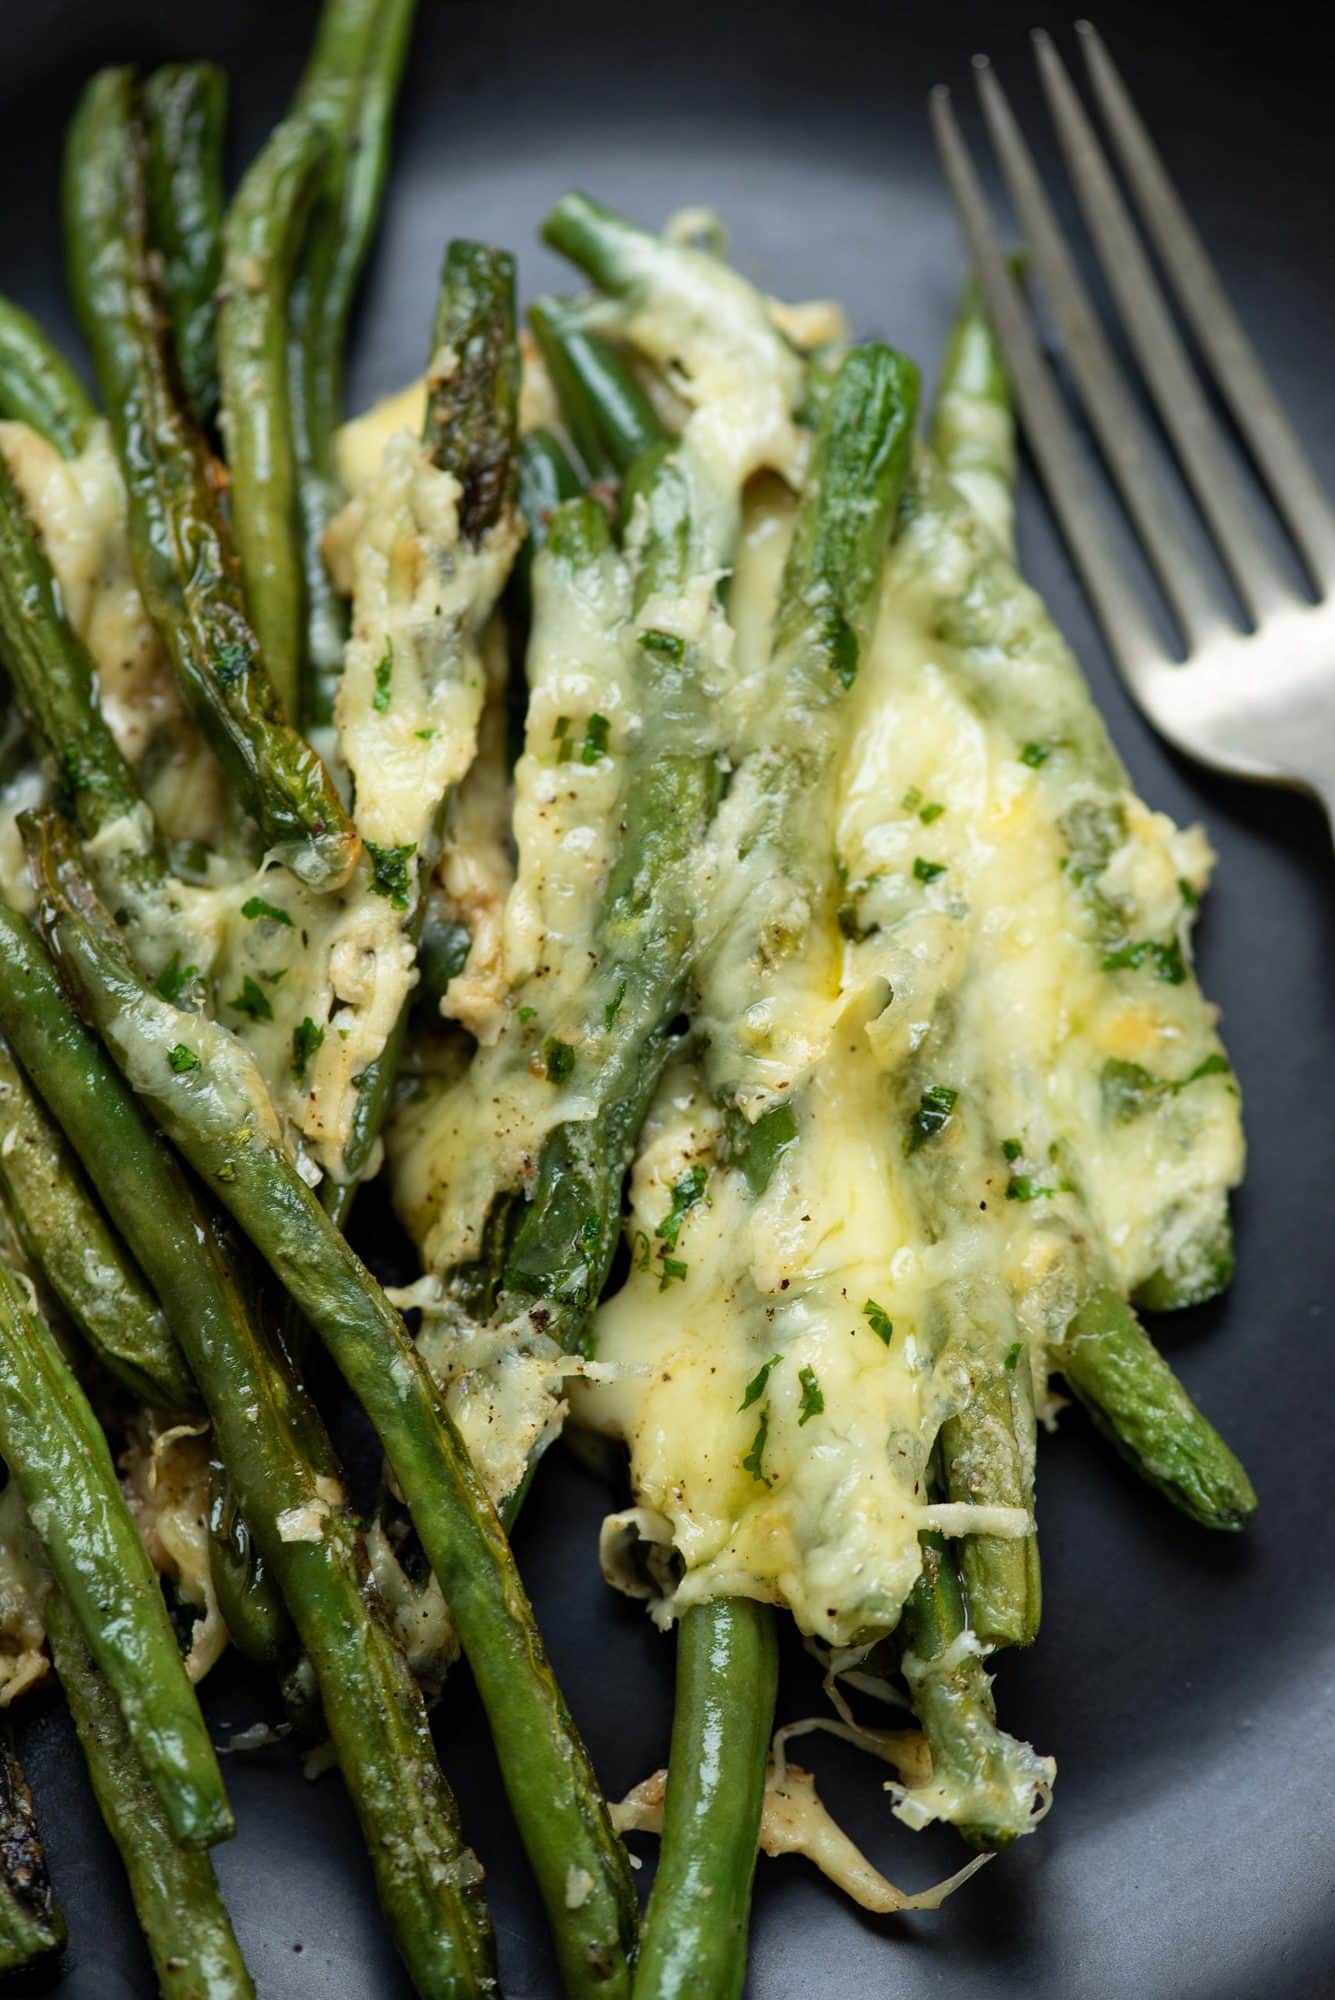 Image of cheese garlic roasted green beans served on a plate with a fork.